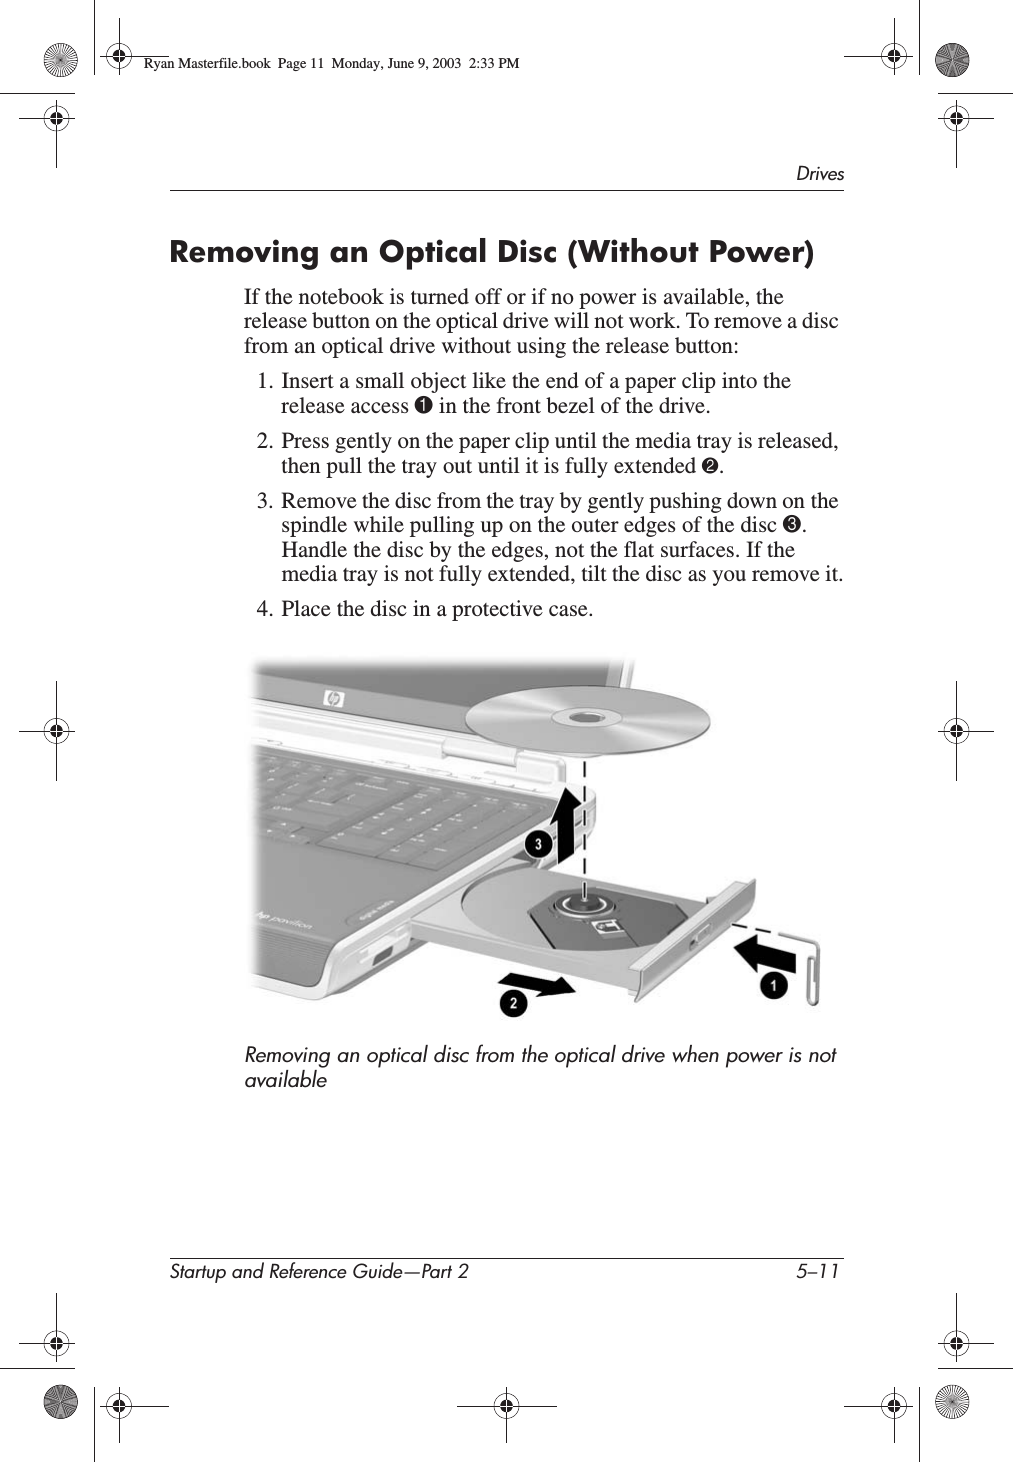 DrivesStartup and Reference Guide—Part 2 5–11Removing an Optical Disc (Without Power)If the notebook is turned off or if no power is available, the release button on the optical drive will not work. To remove a disc from an optical drive without using the release button:1. Insert a small object like the end of a paper clip into the release access 1 in the front bezel of the drive.2. Press gently on the paper clip until the media tray is released, then pull the tray out until it is fully extended 2.3. Remove the disc from the tray by gently pushing down on the spindle while pulling up on the outer edges of the disc 3.Handle the disc by the edges, not the flat surfaces. If the media tray is not fully extended, tilt the disc as you remove it.4. Place the disc in a protective case.Removing an optical disc from the optical drive when power is not availableRyan Masterfile.book  Page 11  Monday, June 9, 2003  2:33 PM